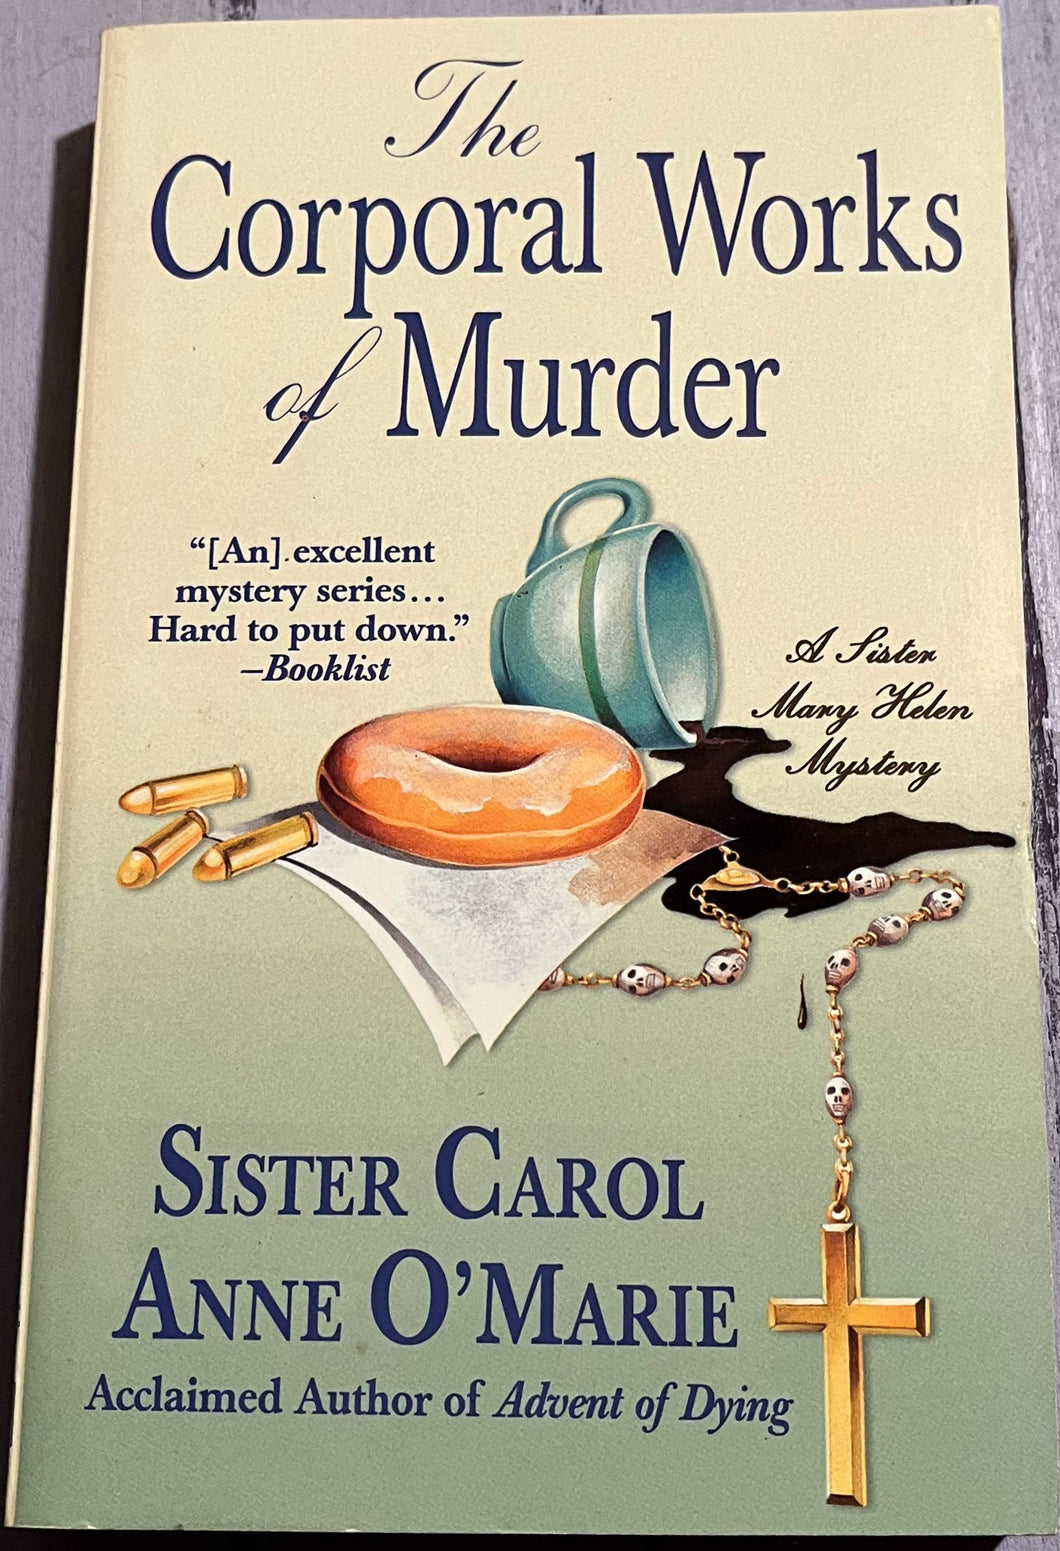 The Corporal Works of Murder